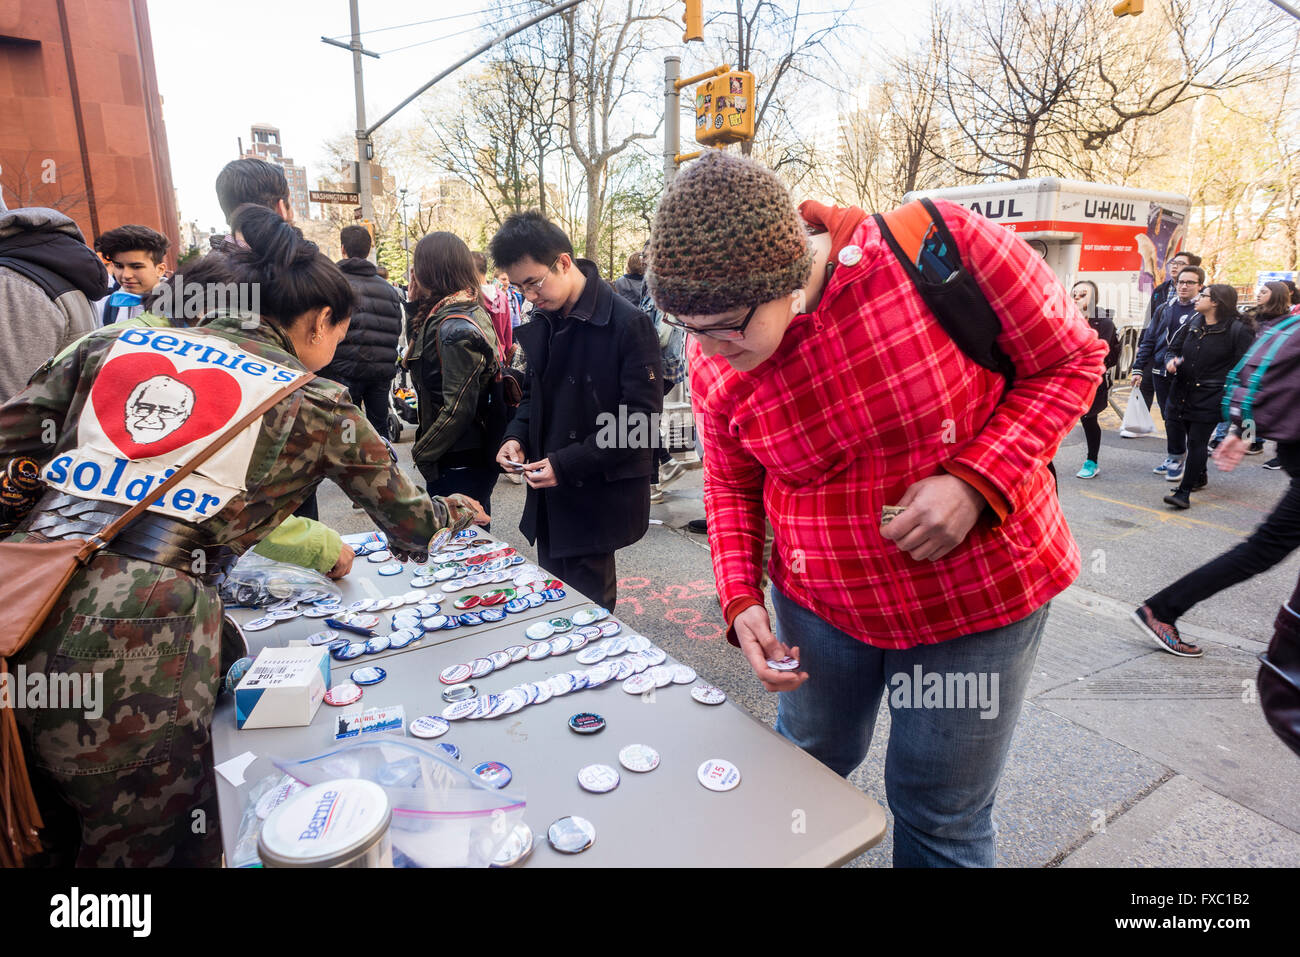 New York, USA. 13th April, 2016. Hours before a Bernie Sanders rally is scheduled to begin, supports sell buttons and other campaign paraphrenalia in Schwartz Plaza near Washingtom Square Park. Over 10,000 people are expected to attend the rally for the Democratic Presidential Candidate. Credit: Stacy Walsh Rosenstock/Alamy Live News Stock Photo